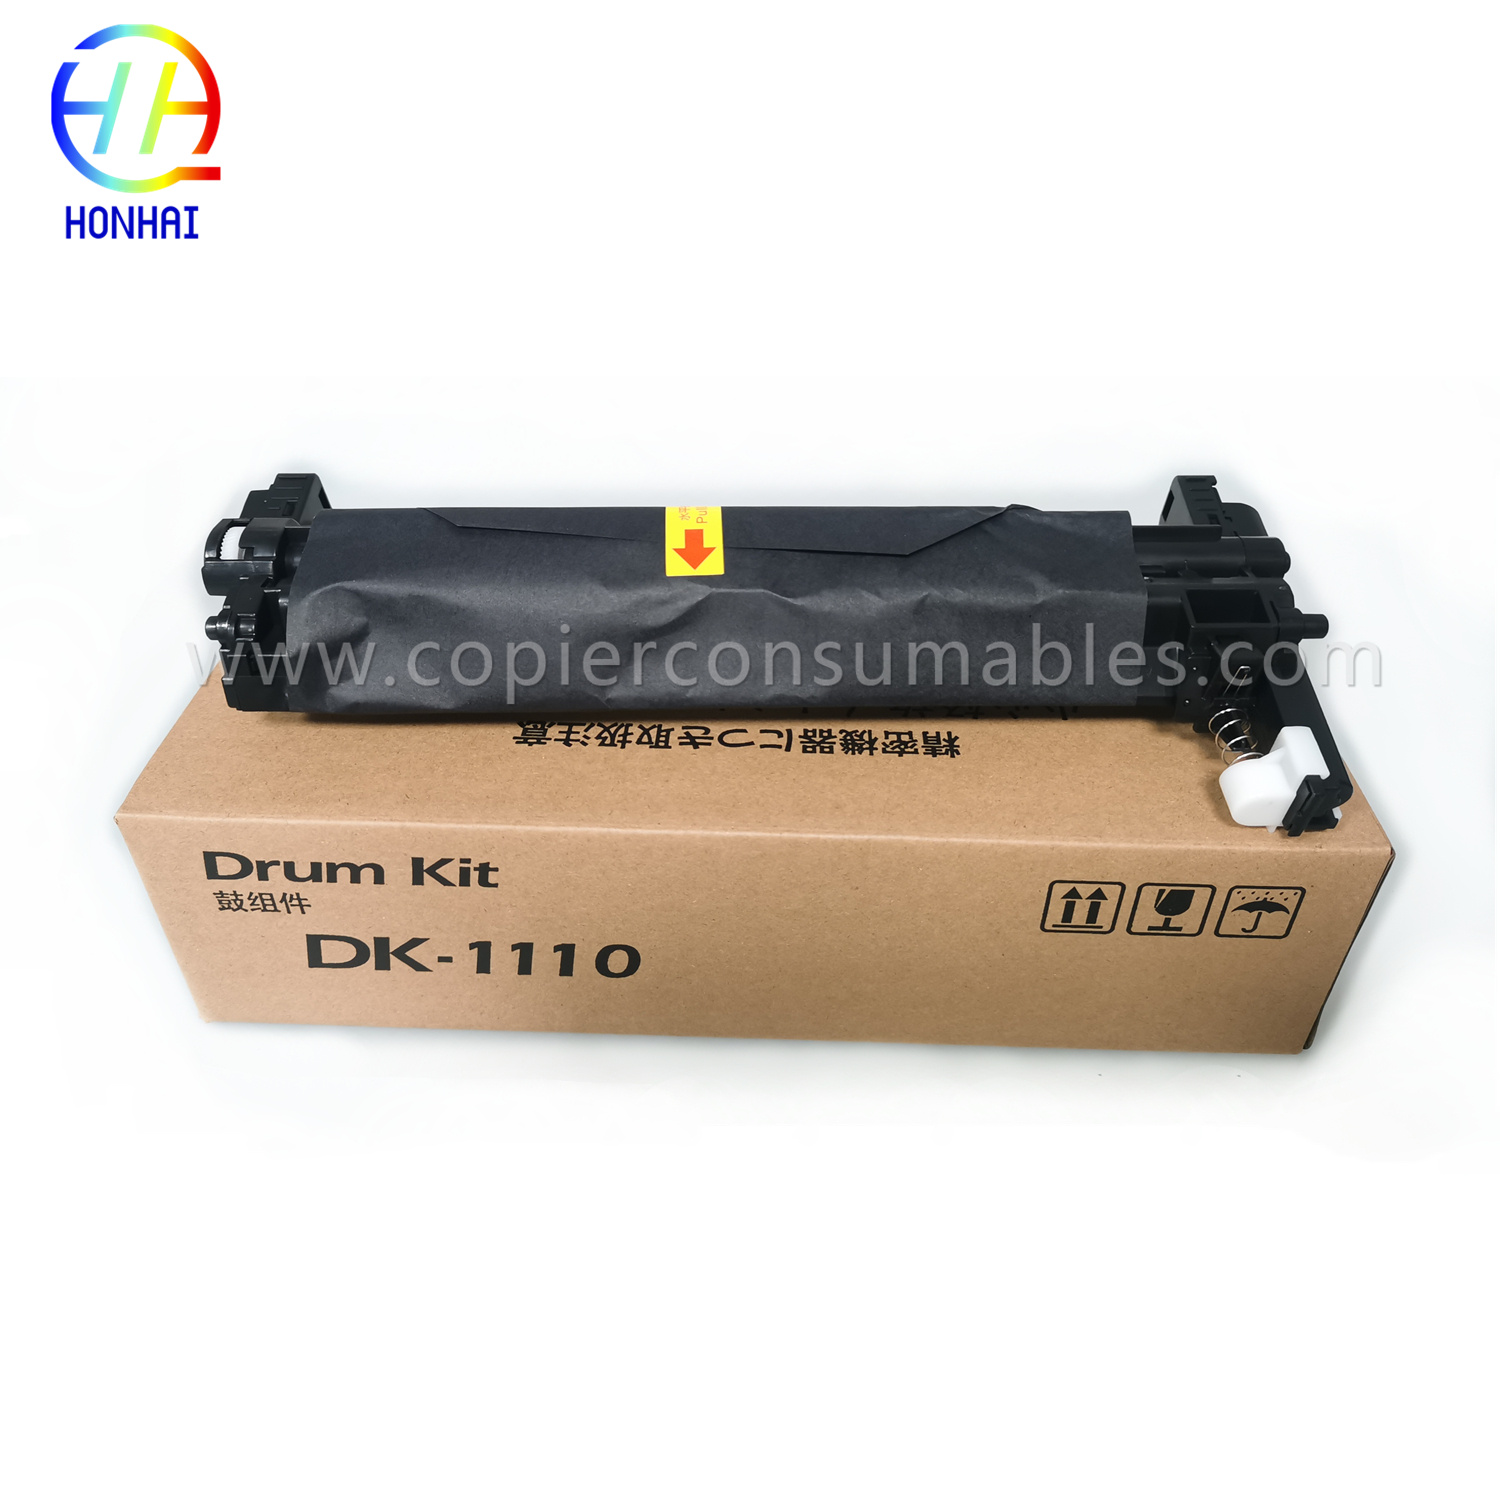 Drum unit for Kyocera ECOSYS FS-1040 1060DN 1020MFP 1041 1120MFP 1025MFP 1061DN